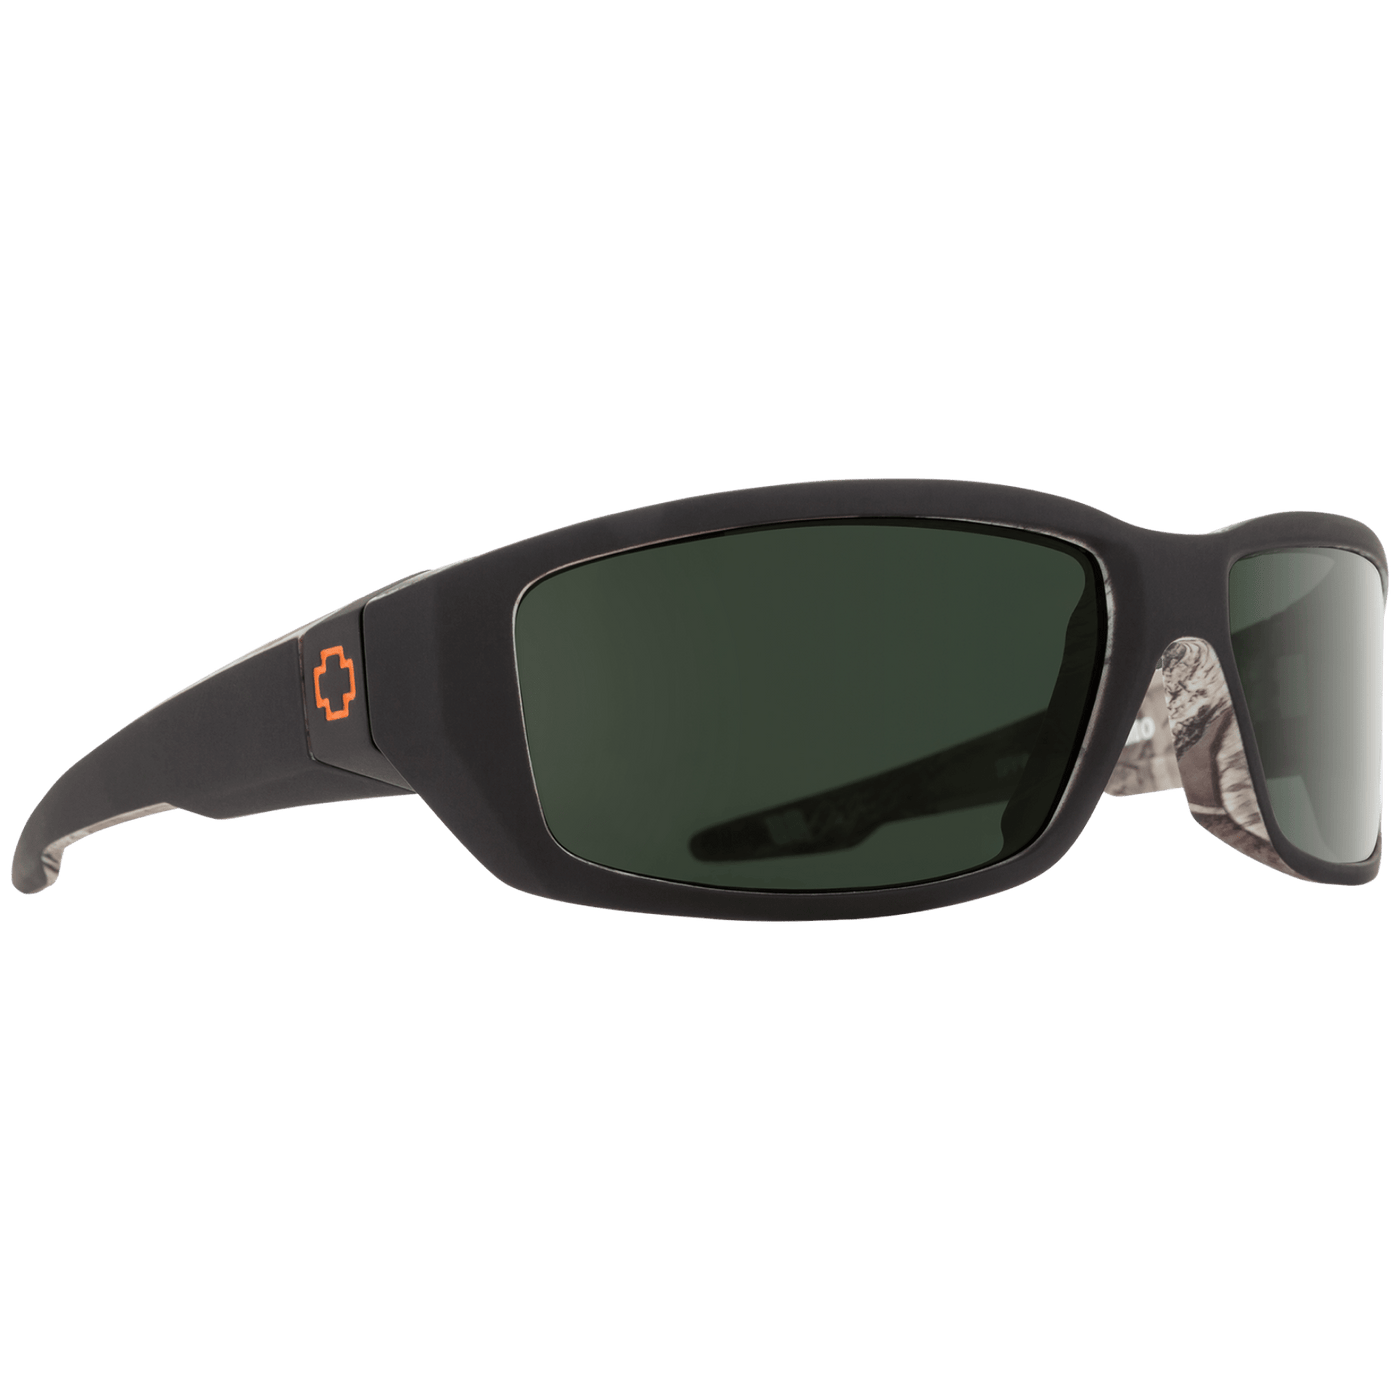 SPY DIRTY MO Polarized Sunglasses - Gray/Green 8Lines Shop - Fast Shipping